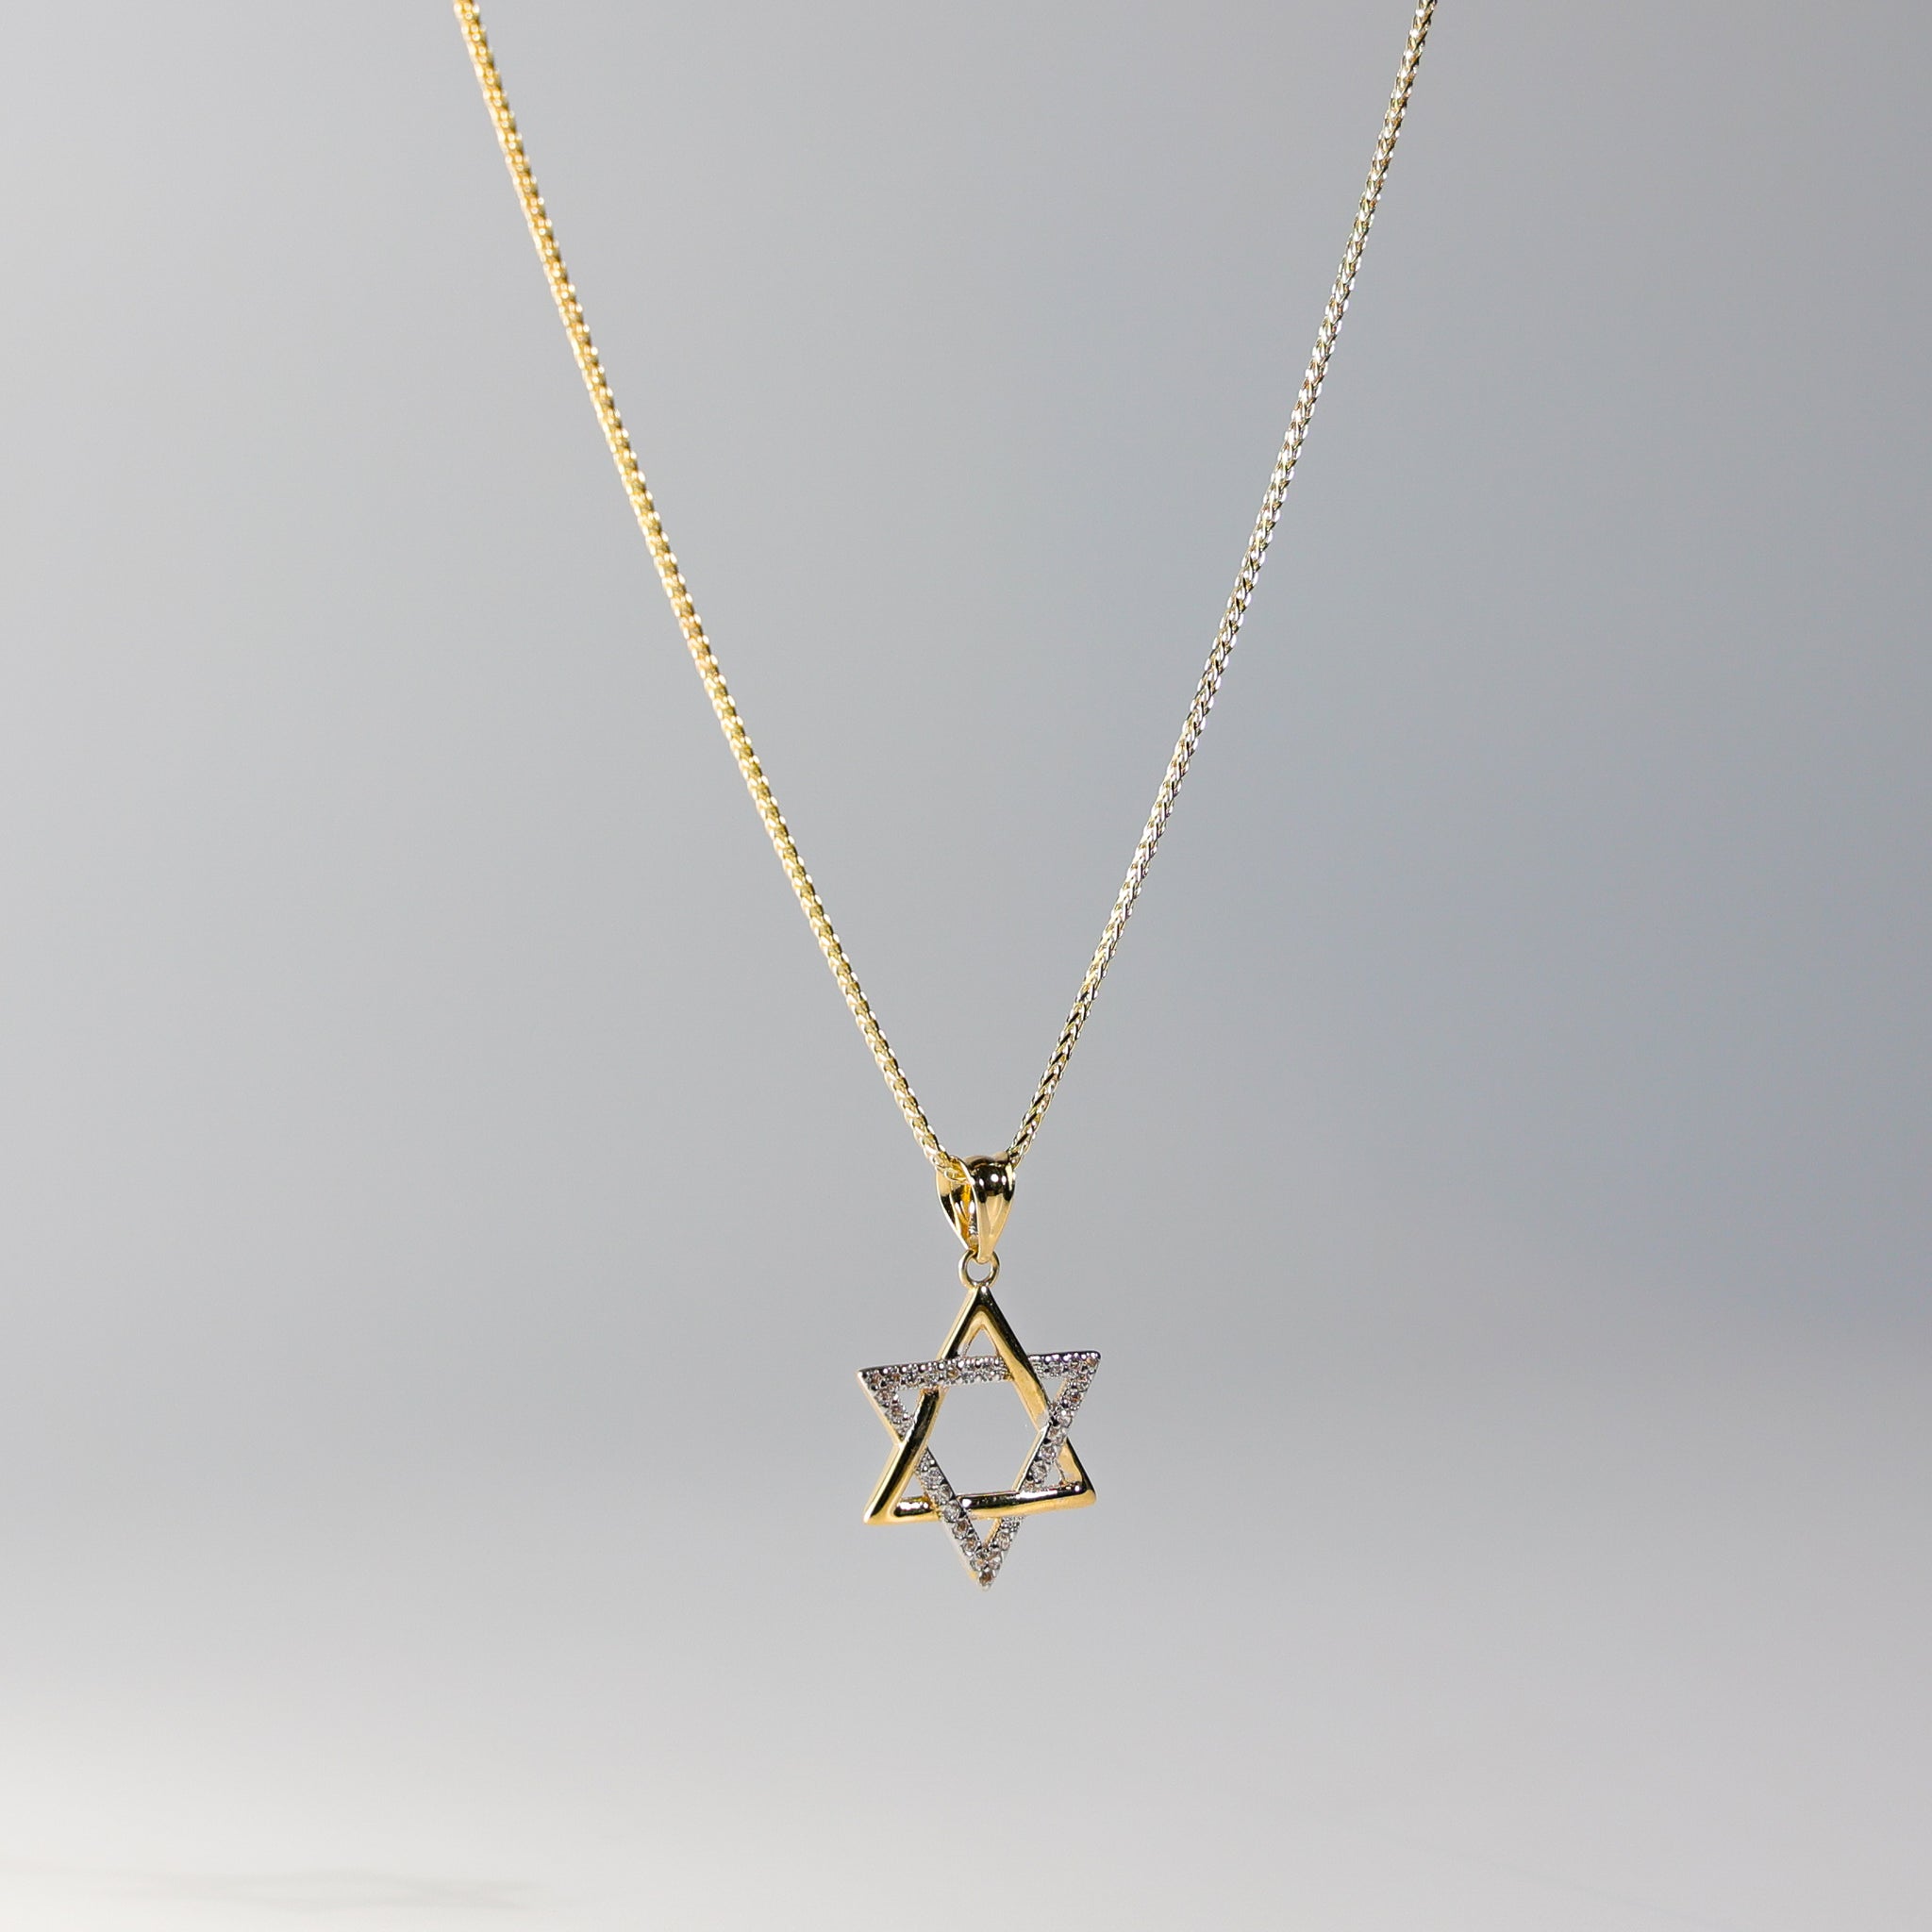 Gold Star of David Pendant Model-2241 - Charlie & Co. Jewelry